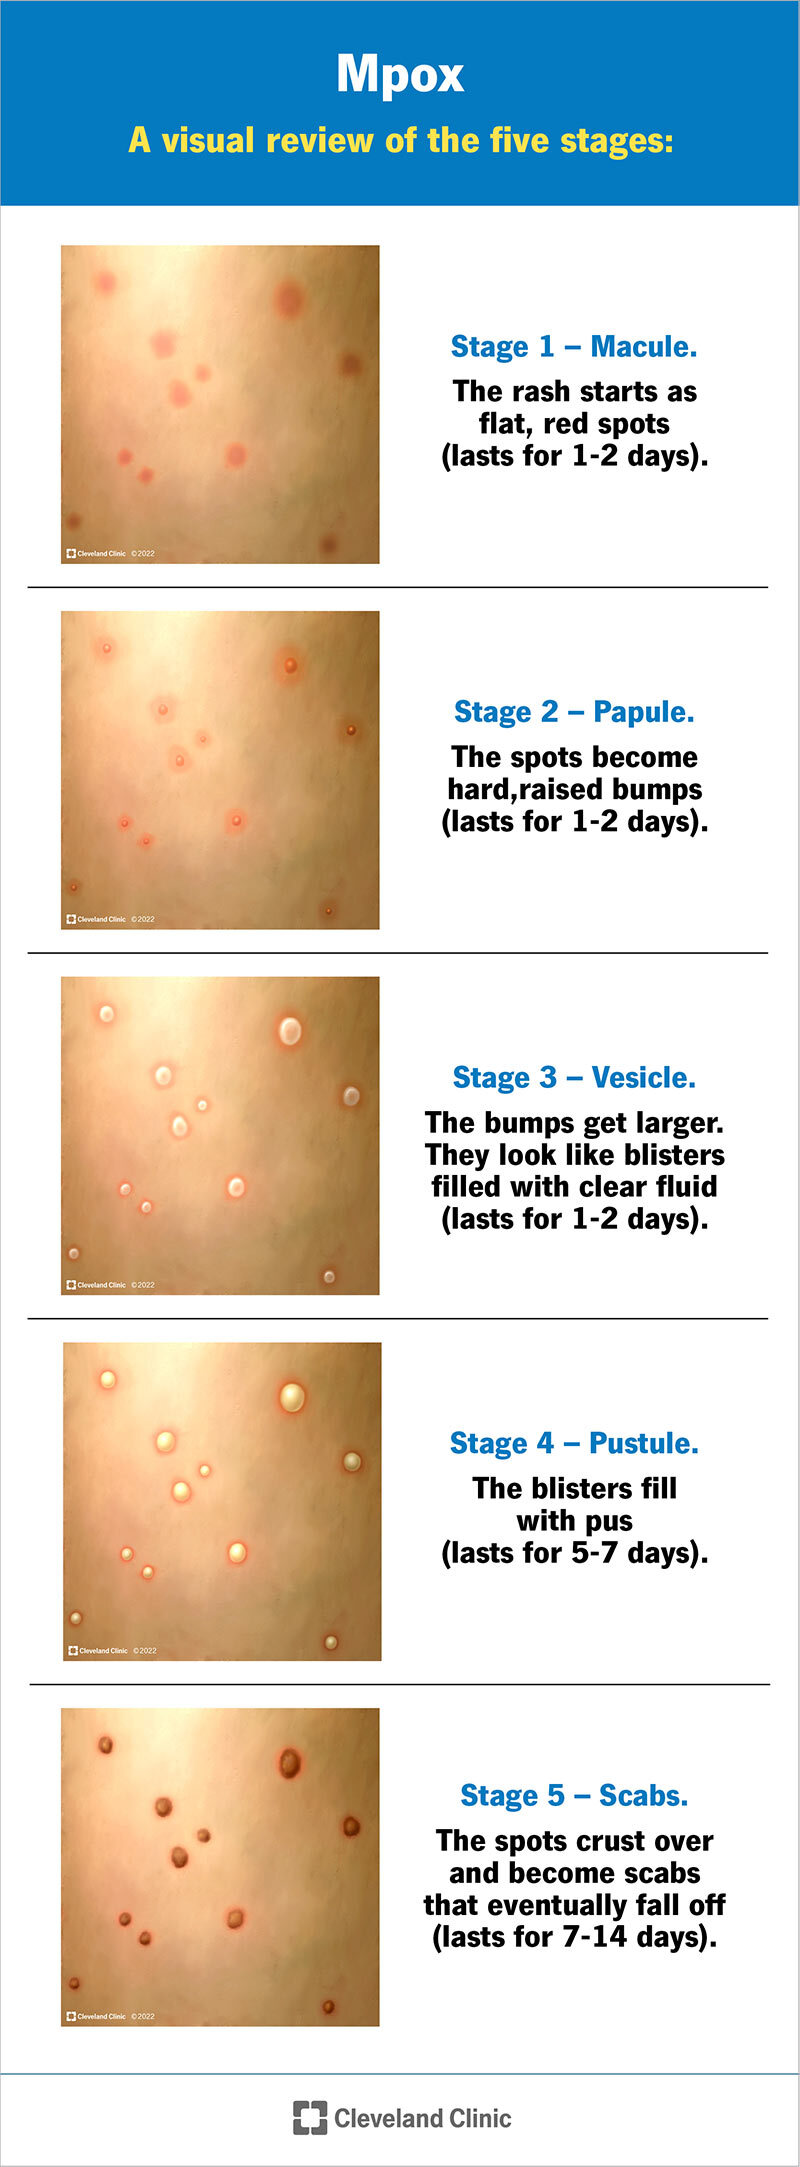 Mpox rash starts as flat, red spots that become raised, fill with fluid and pus, then crust and fall off.